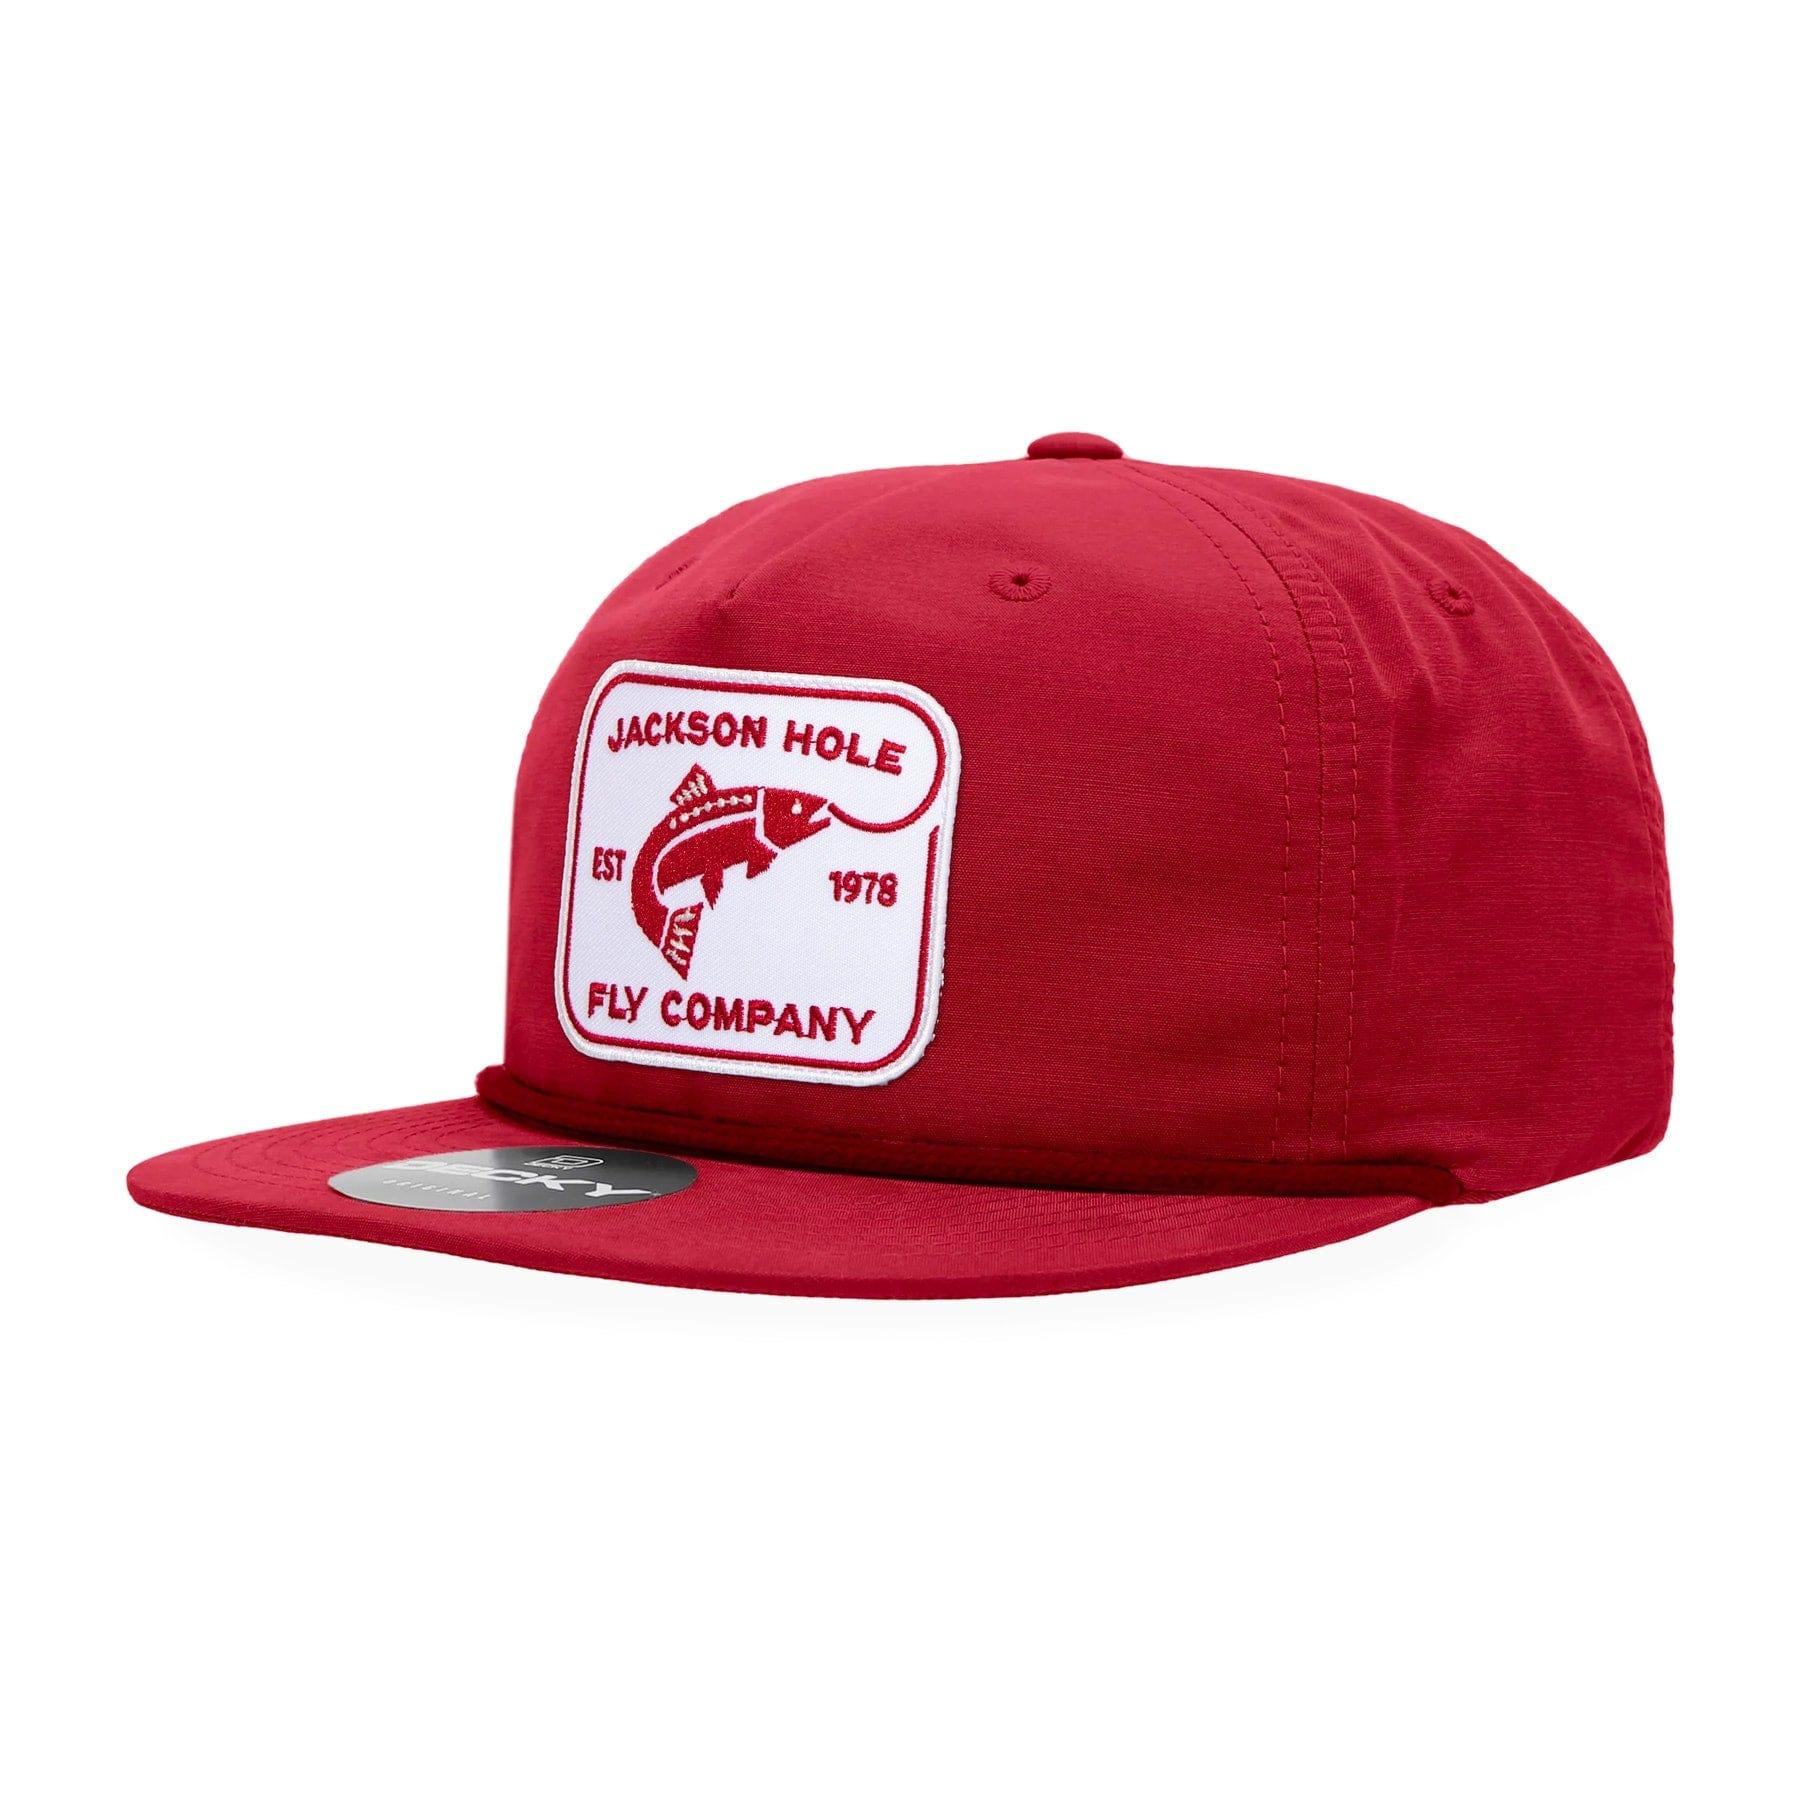 JHFLYCO Brushed Cotton Ball Cap - Rectangle Logo - Adjustable / Red / White Patch | Jackson Hole Fly Company